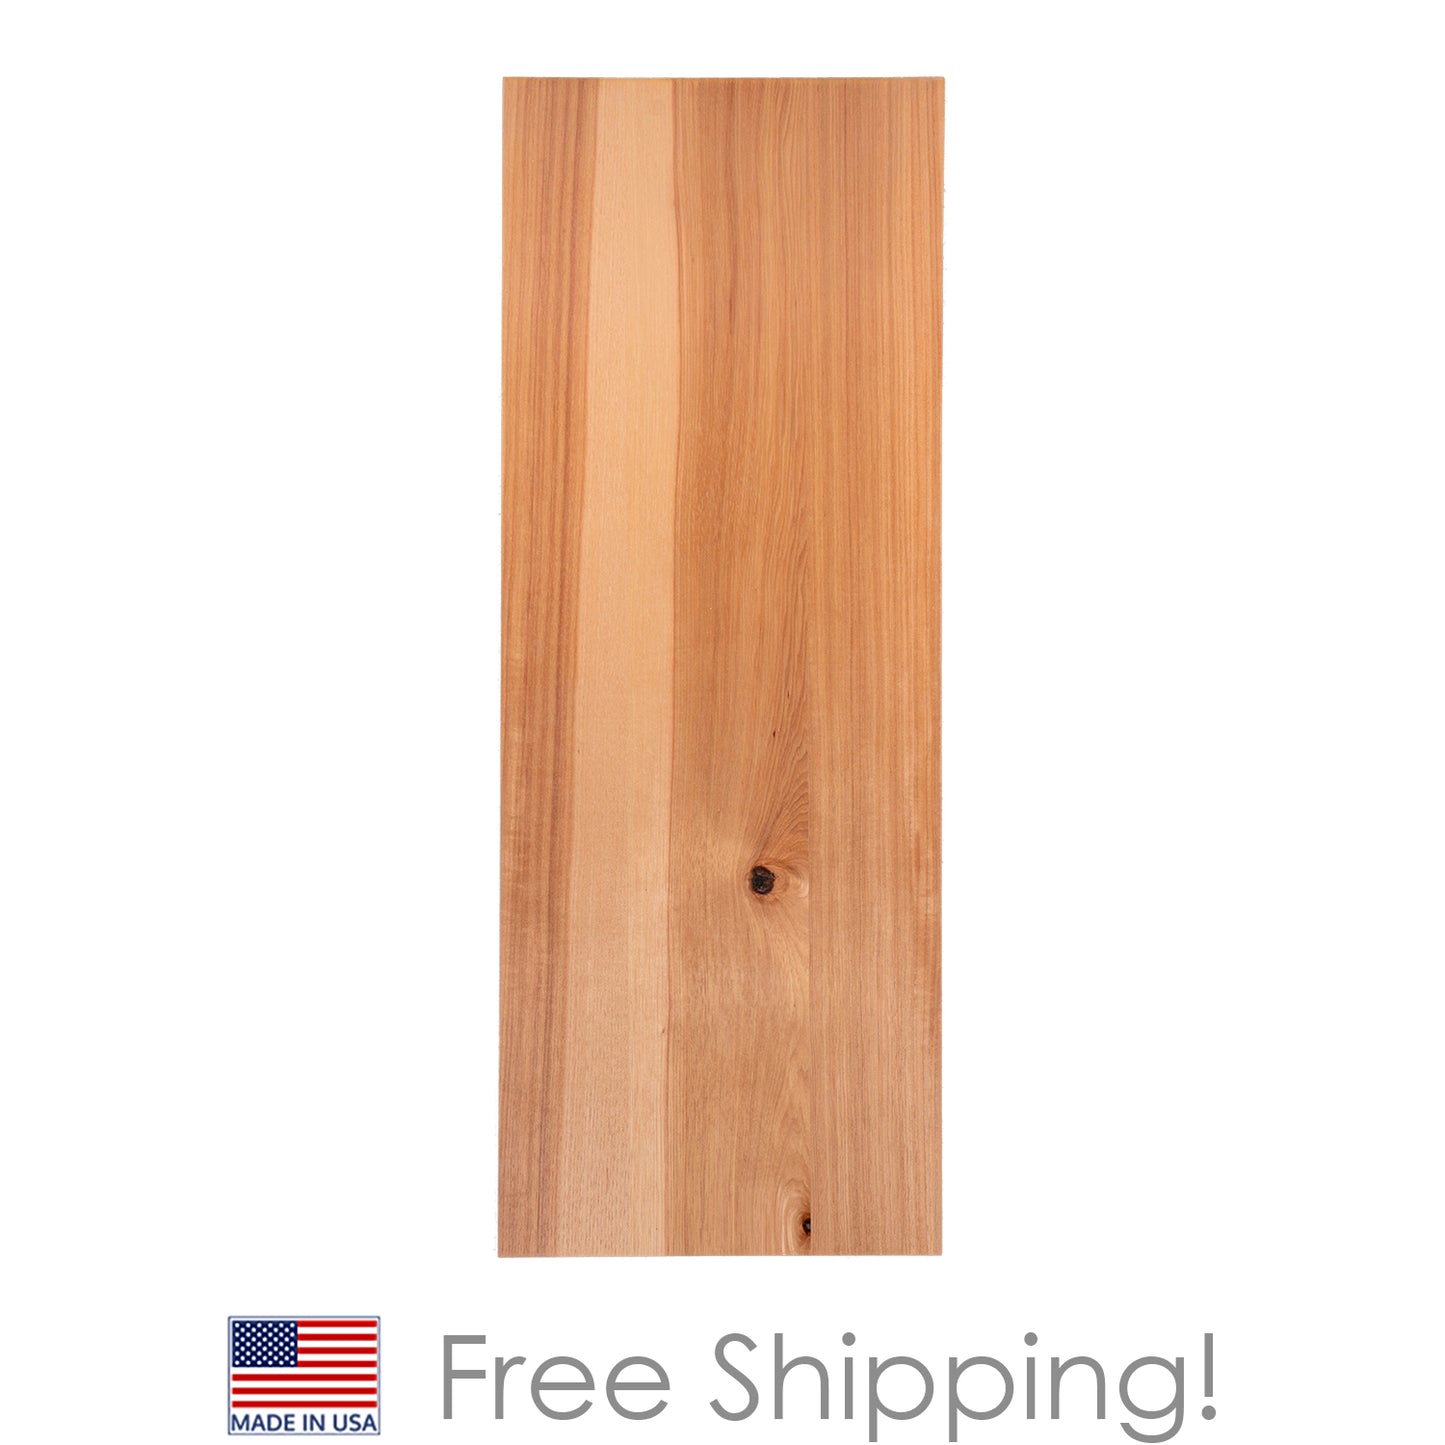 Quicklock RTA (Ready-to-Assemble) Rustic Hickory .25"X11.25"X36" End Panel